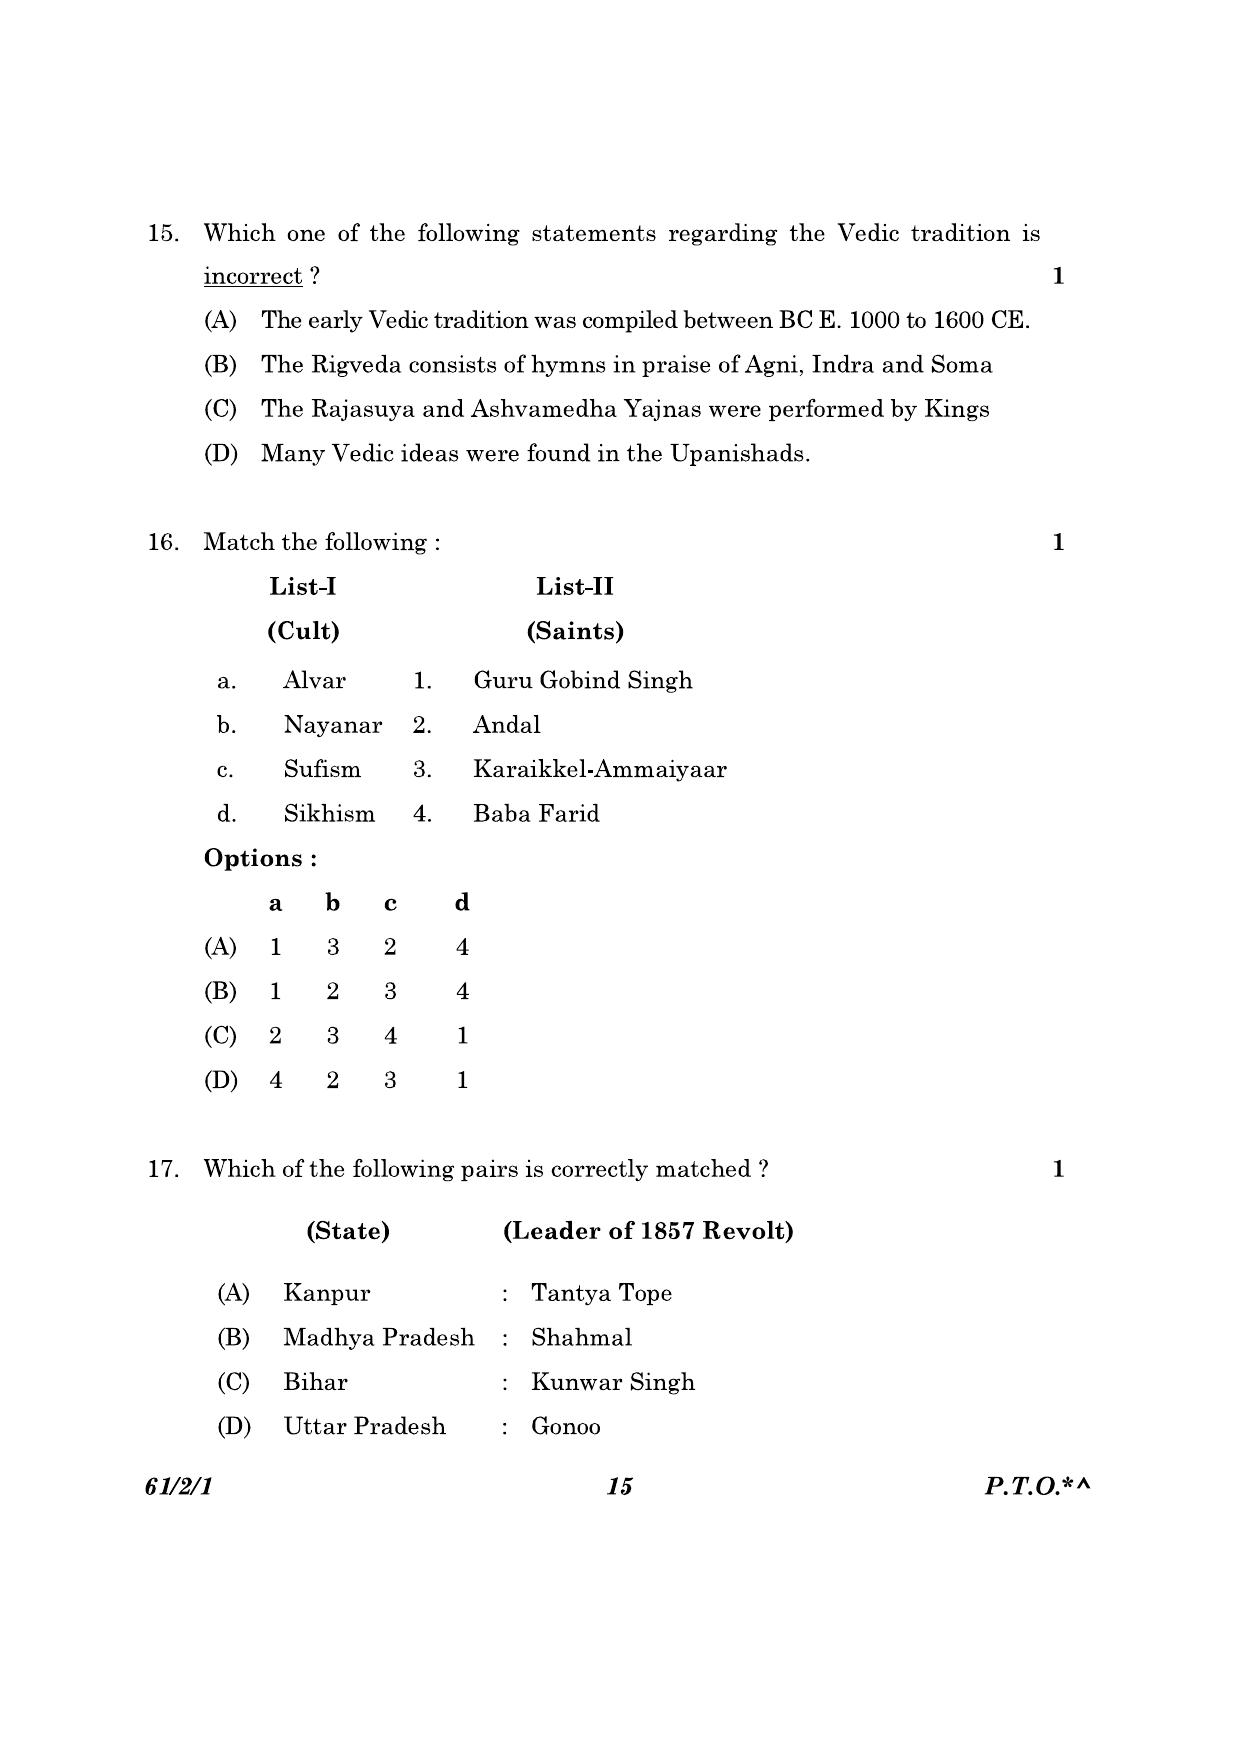 CBSE Class 12 61-2-1 History 2023 Question Paper - Page 15